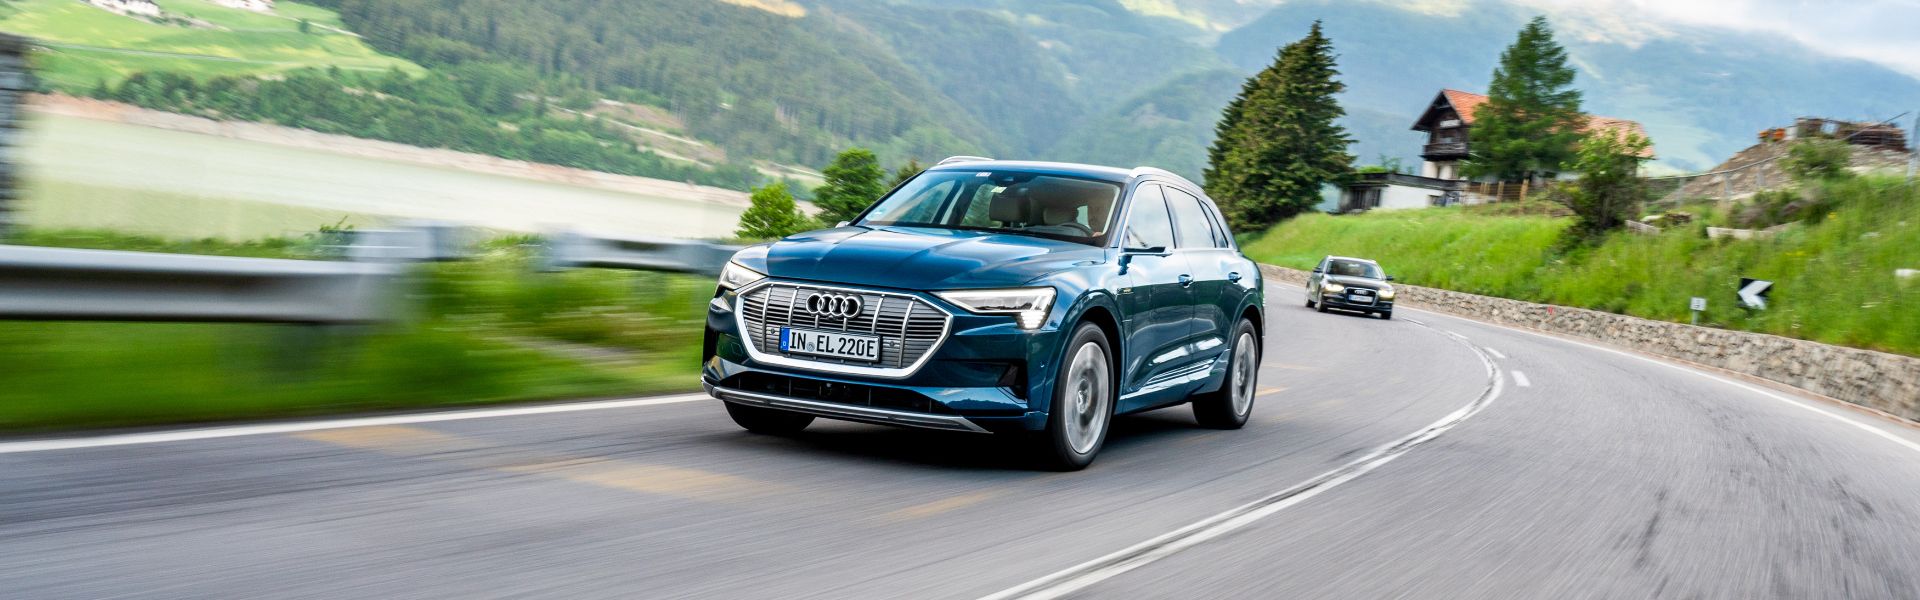 Audi e-tron driving on a country road